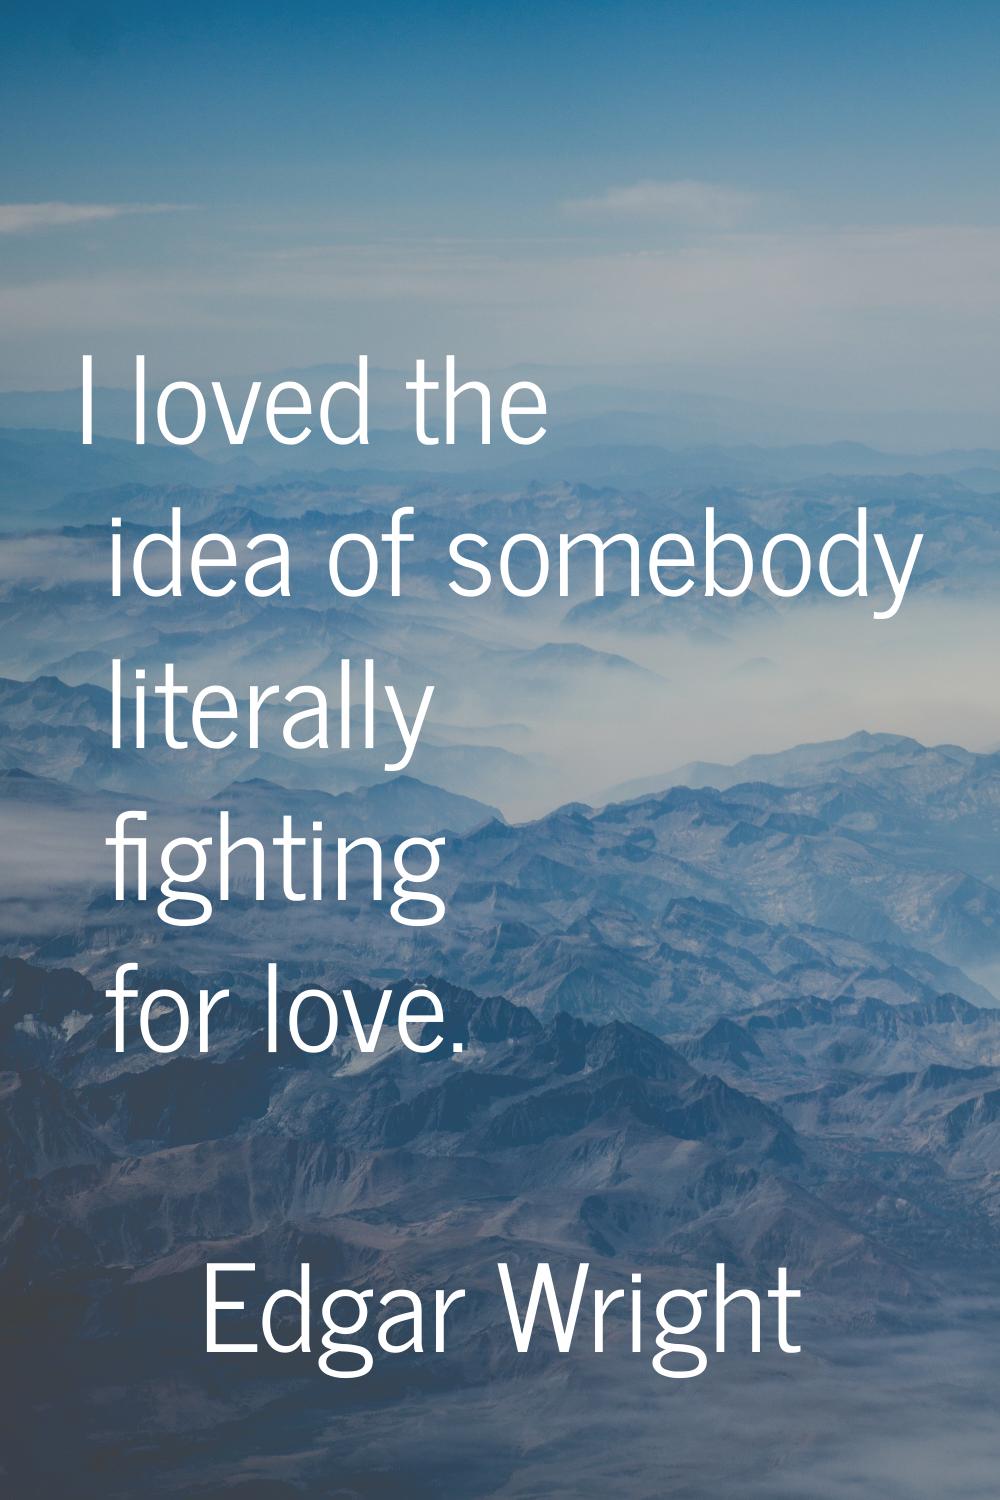 I loved the idea of somebody literally fighting for love.